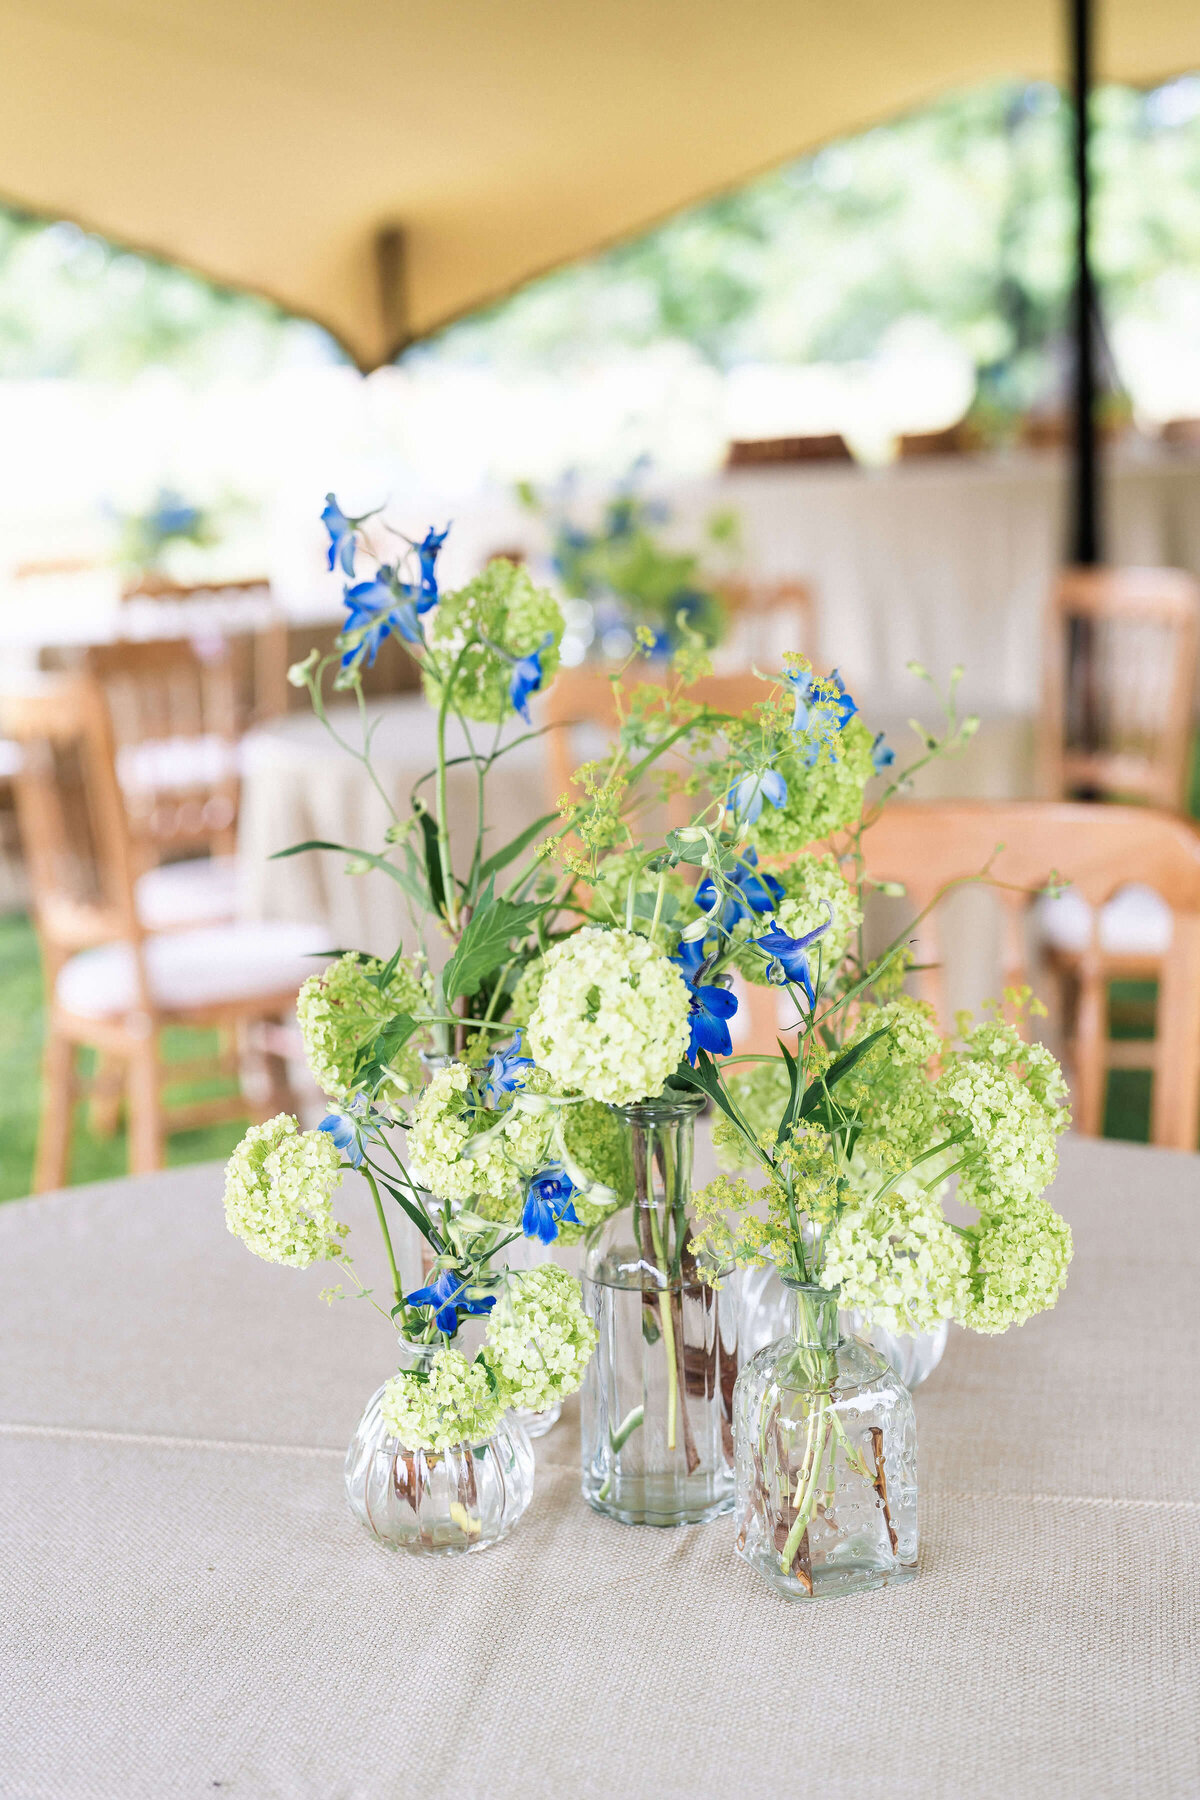 bud vases of green and blue flowers on a dining table outside under a canvas marquee for a birthday party afternoon tea at avington park